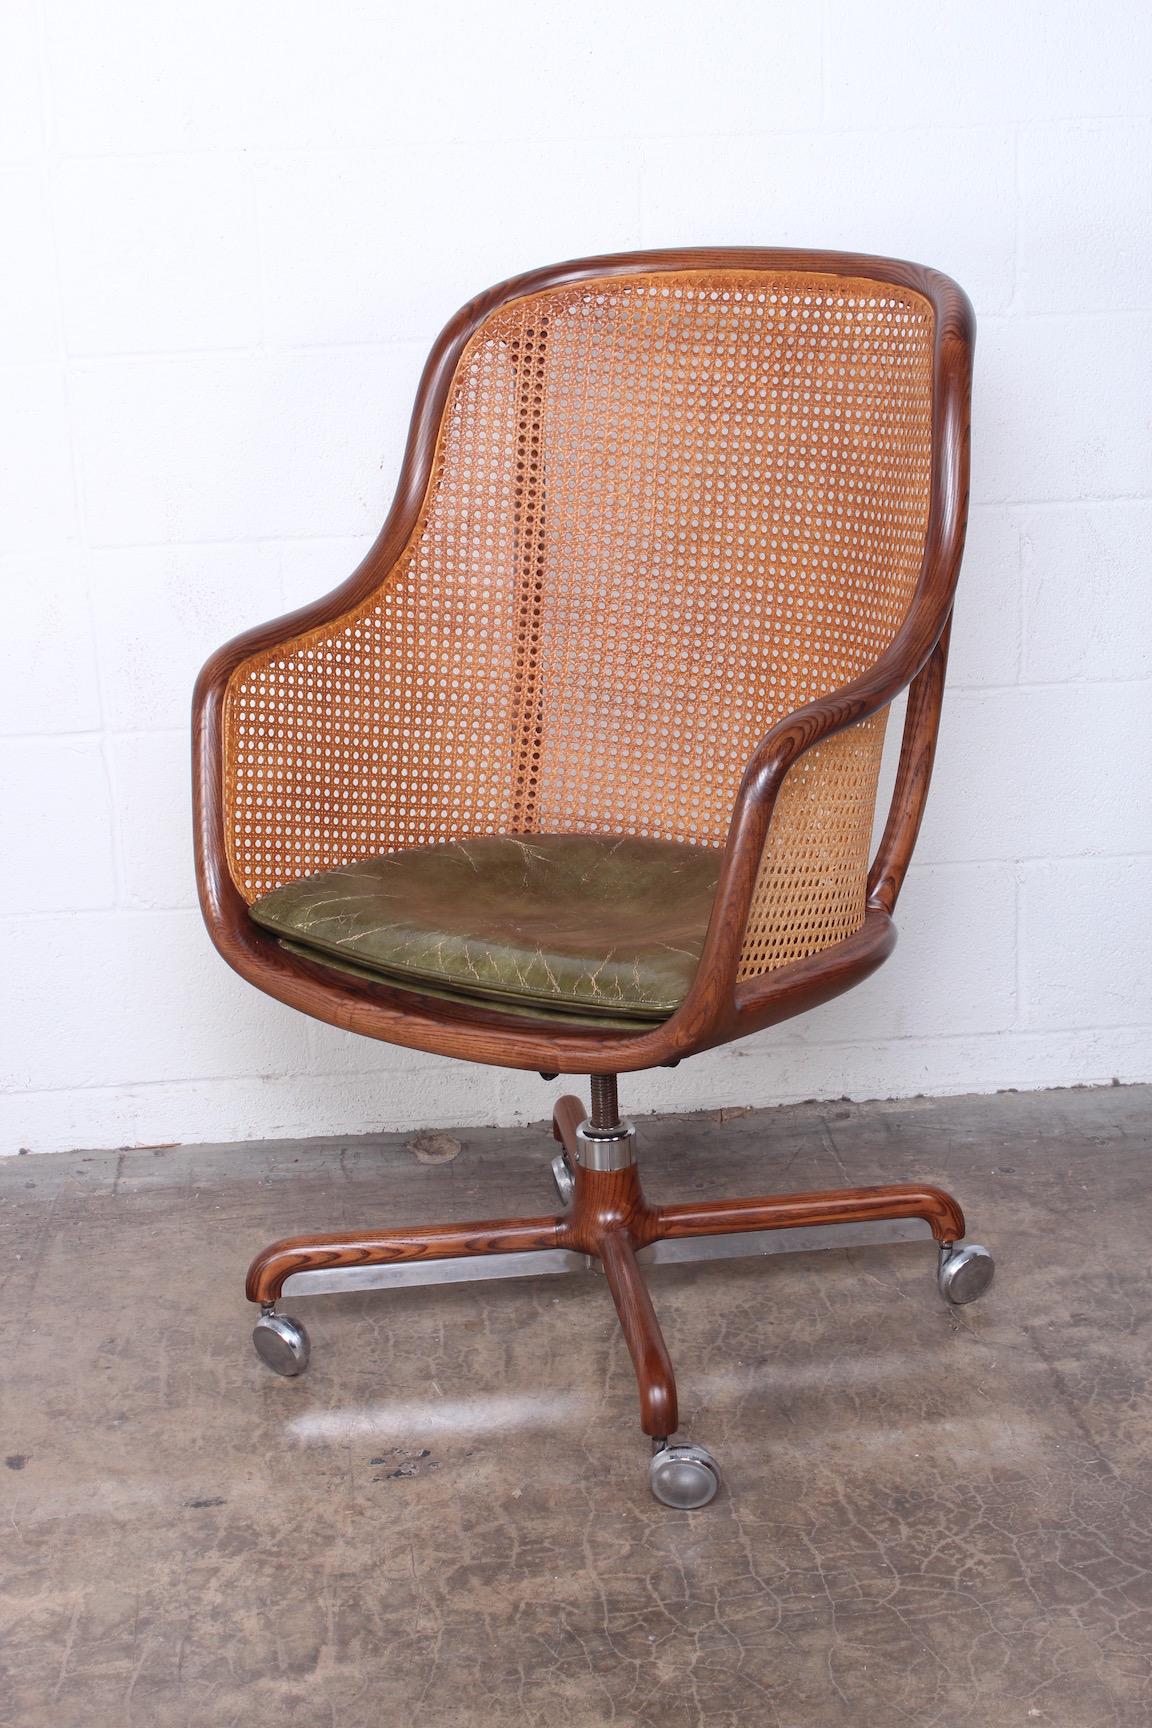 A fully caned desk chair with ash frame and original leather seat. Designed by Ward Bennett for Brickel.